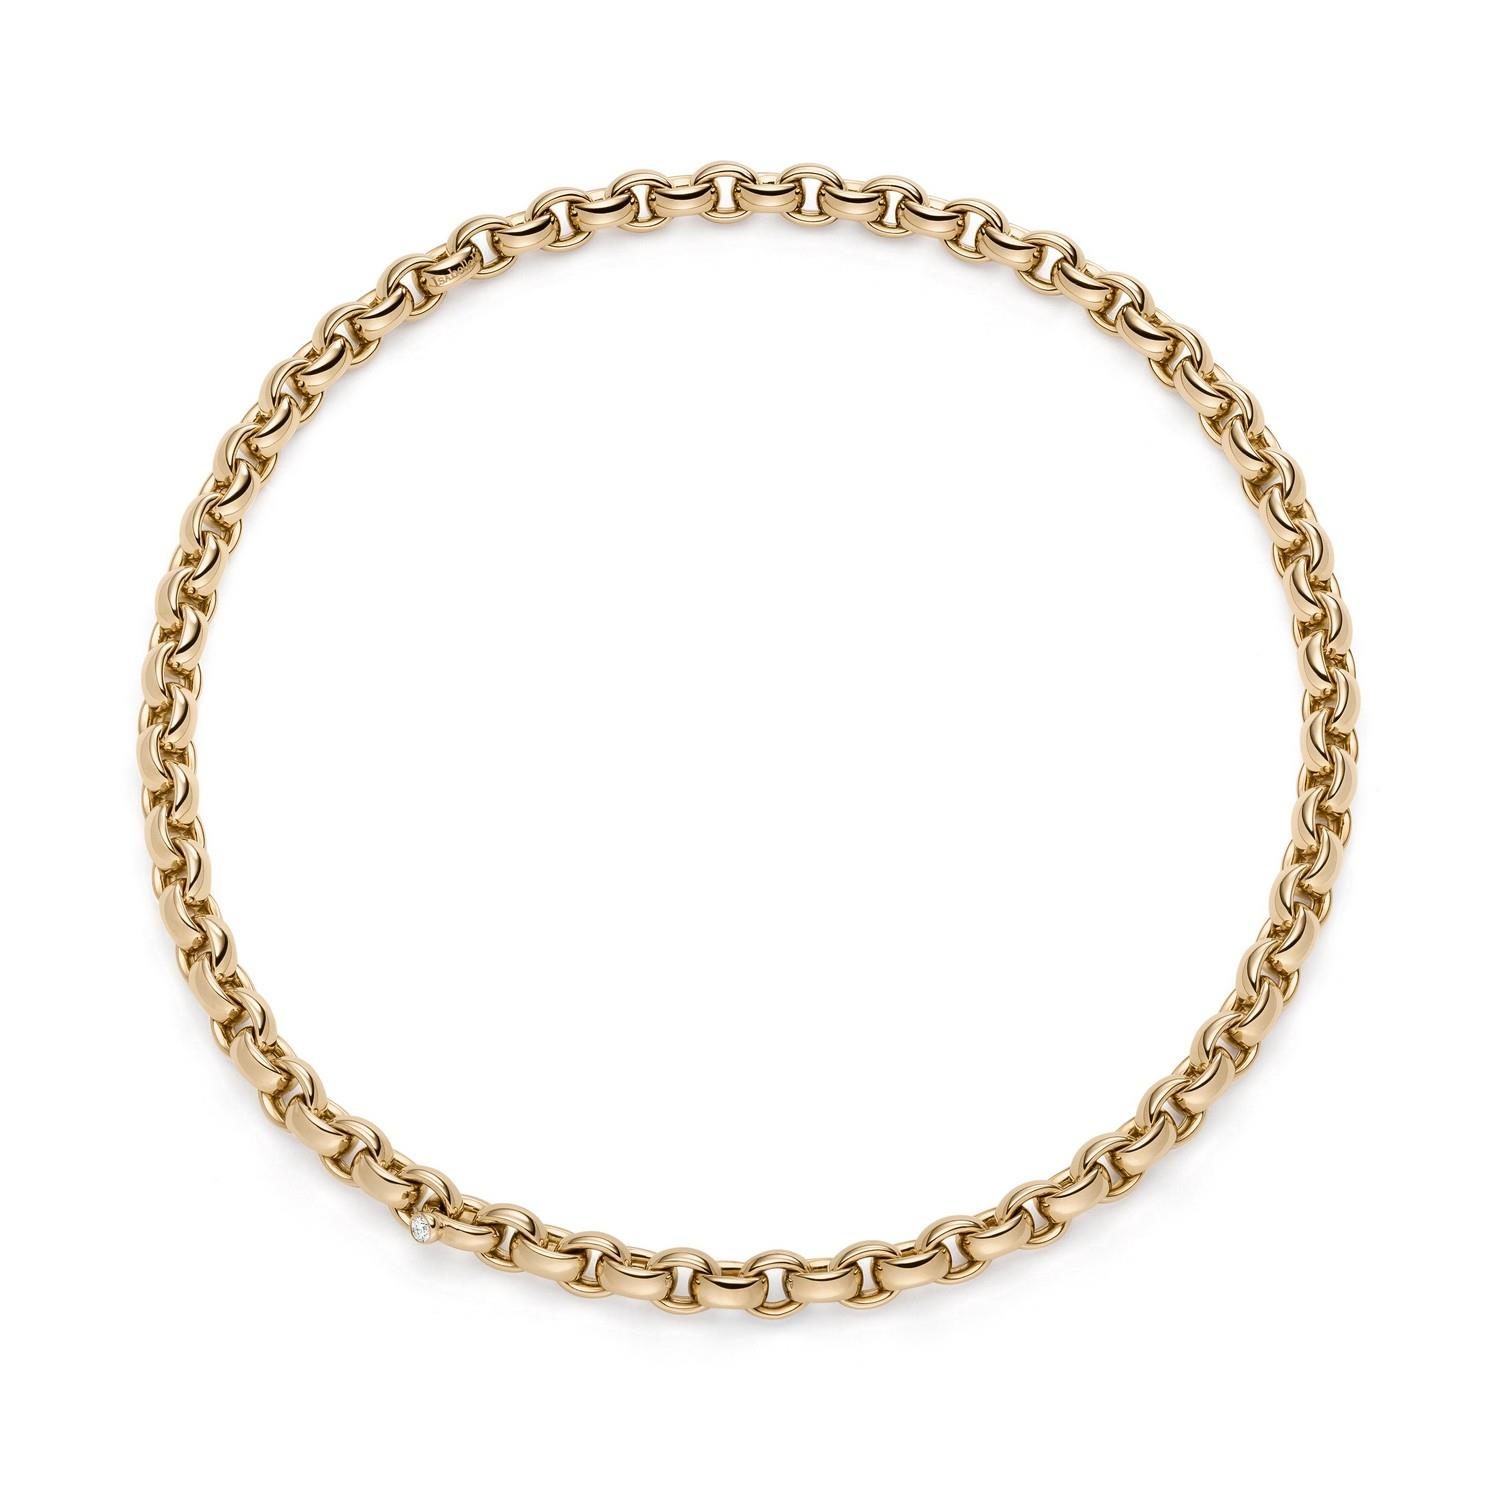 ISABELLE FA COLLIER "CHACHA 8" - 04108-45BKL-ROS